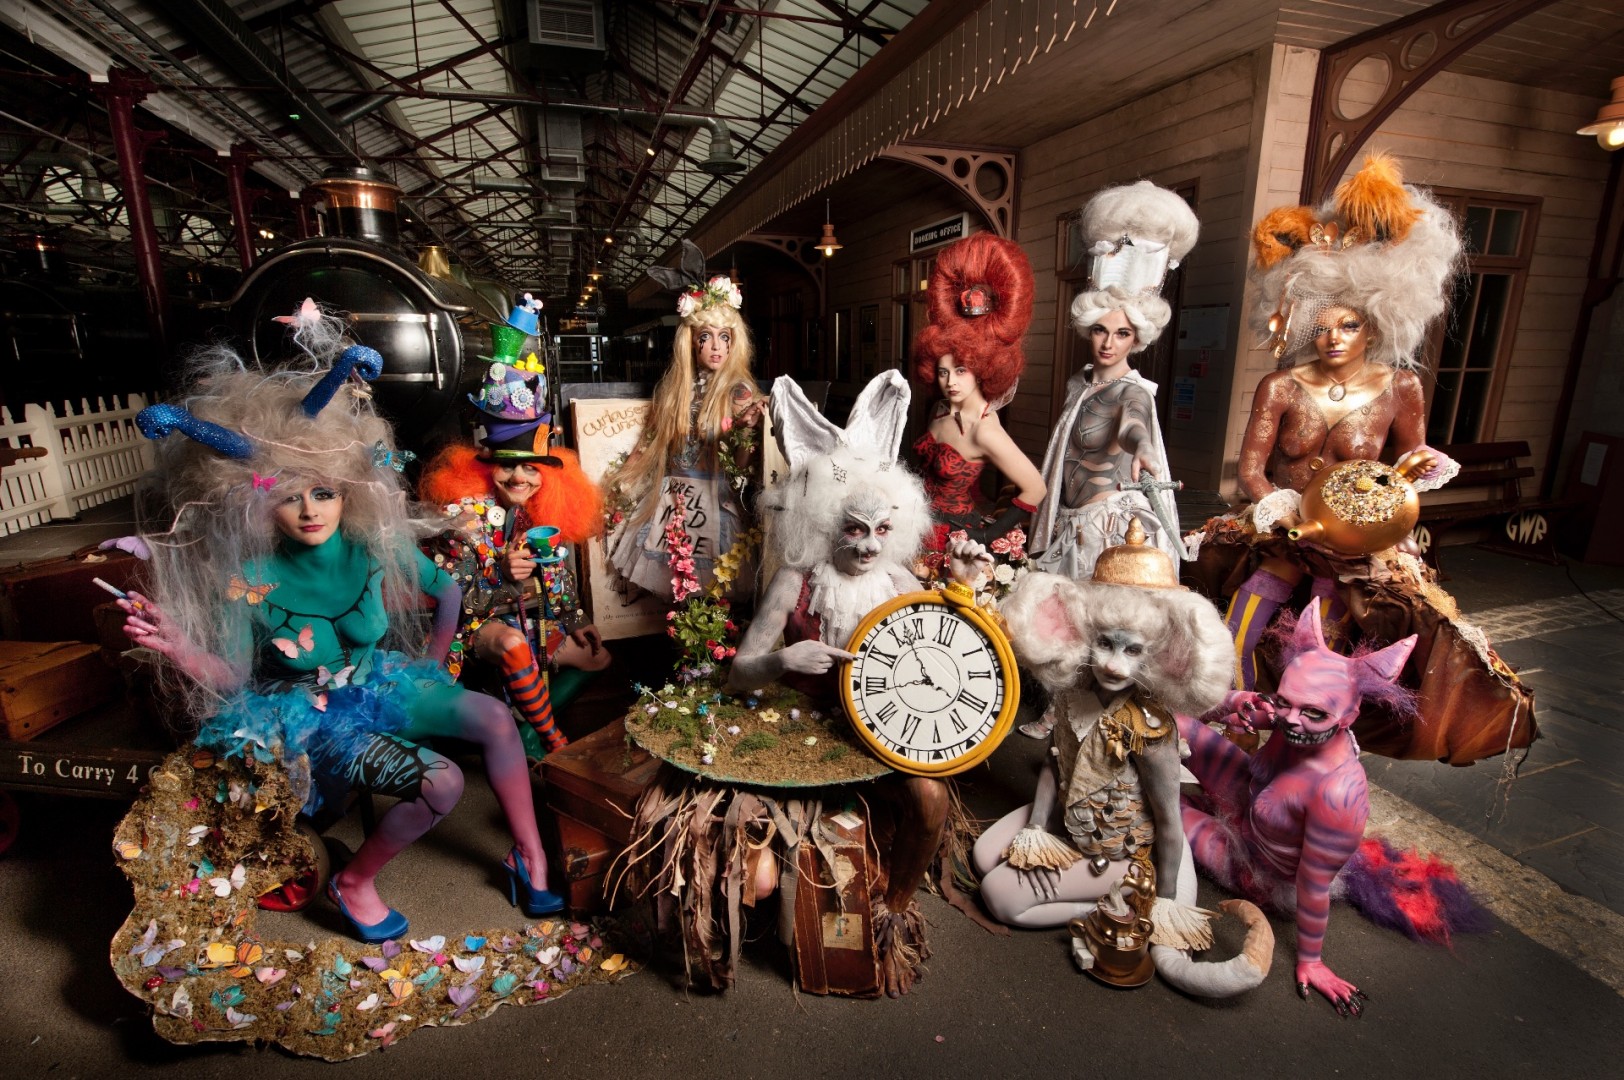 group photo for my alice in wonderland end of year show, completed with the help of Will Shepard <br />
<br />
other artists for other looks credited below as available